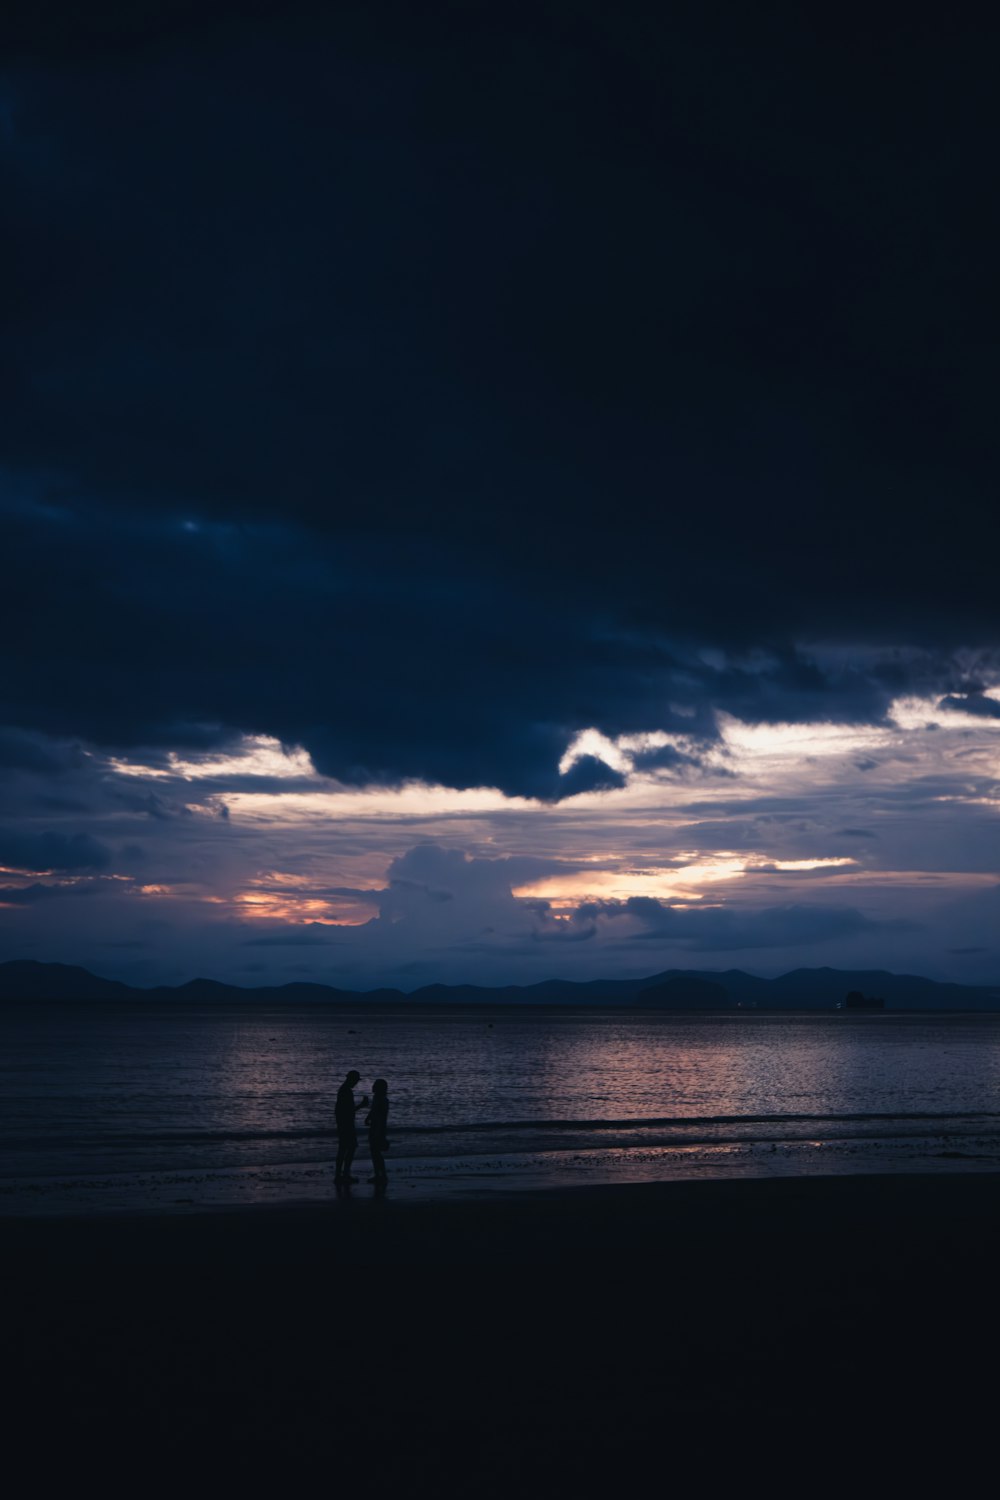 two people standing on a beach under a cloudy sky